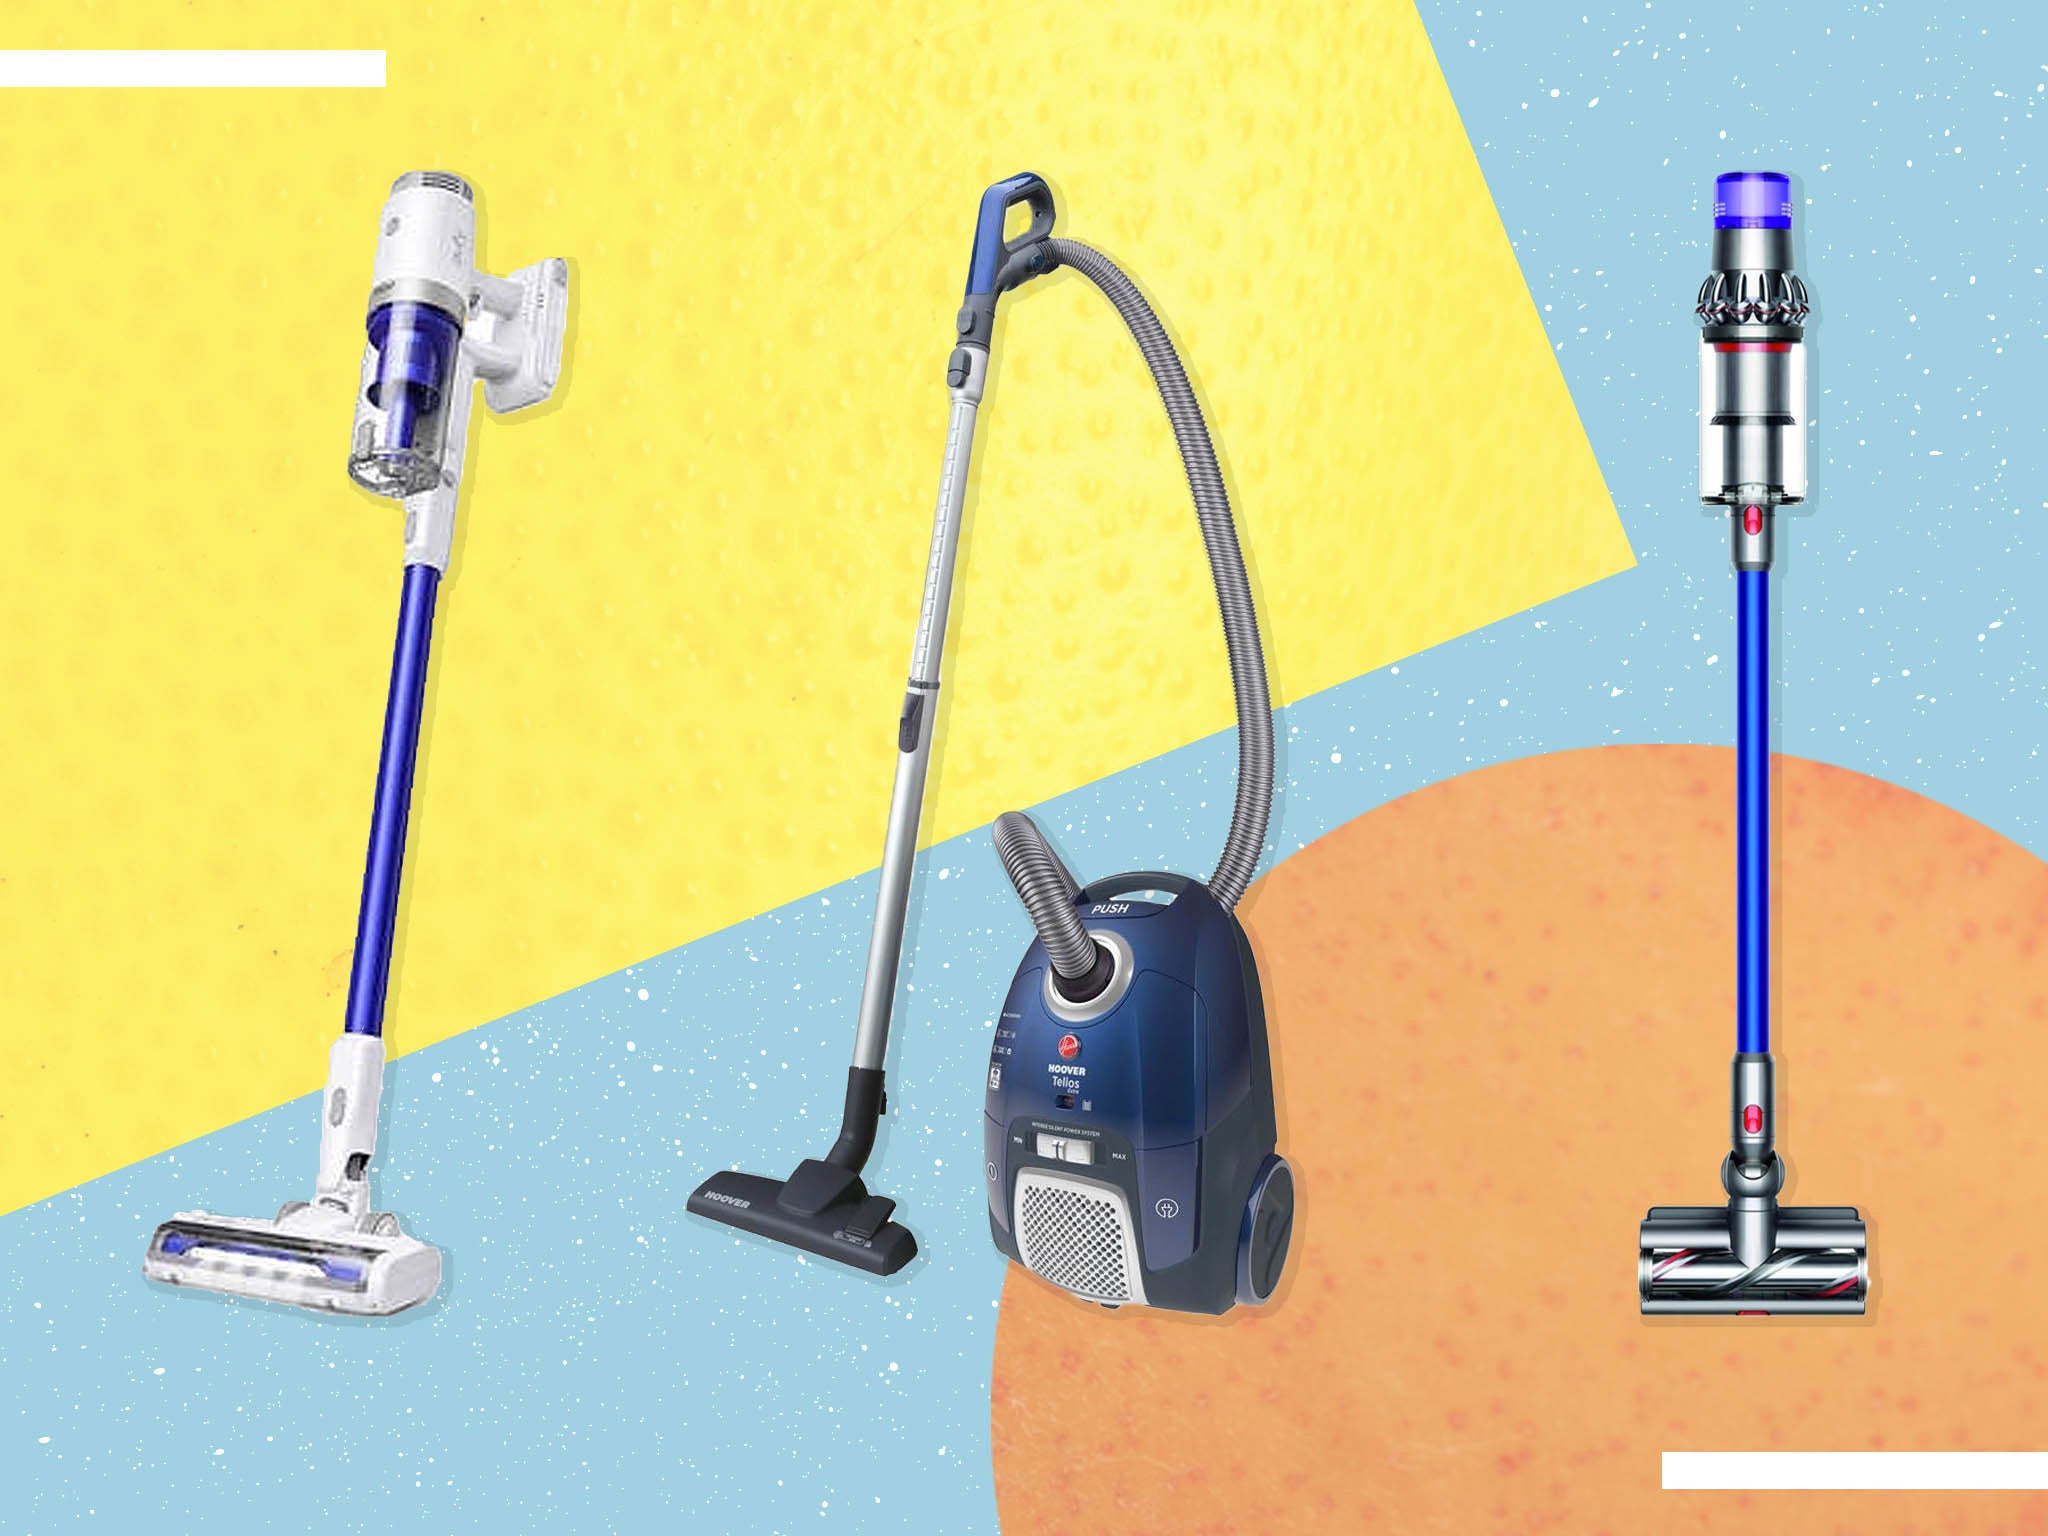 https://static.independent.co.uk/2021/04/14/08/indybest%20vacuum%20buying%20guide.jpg